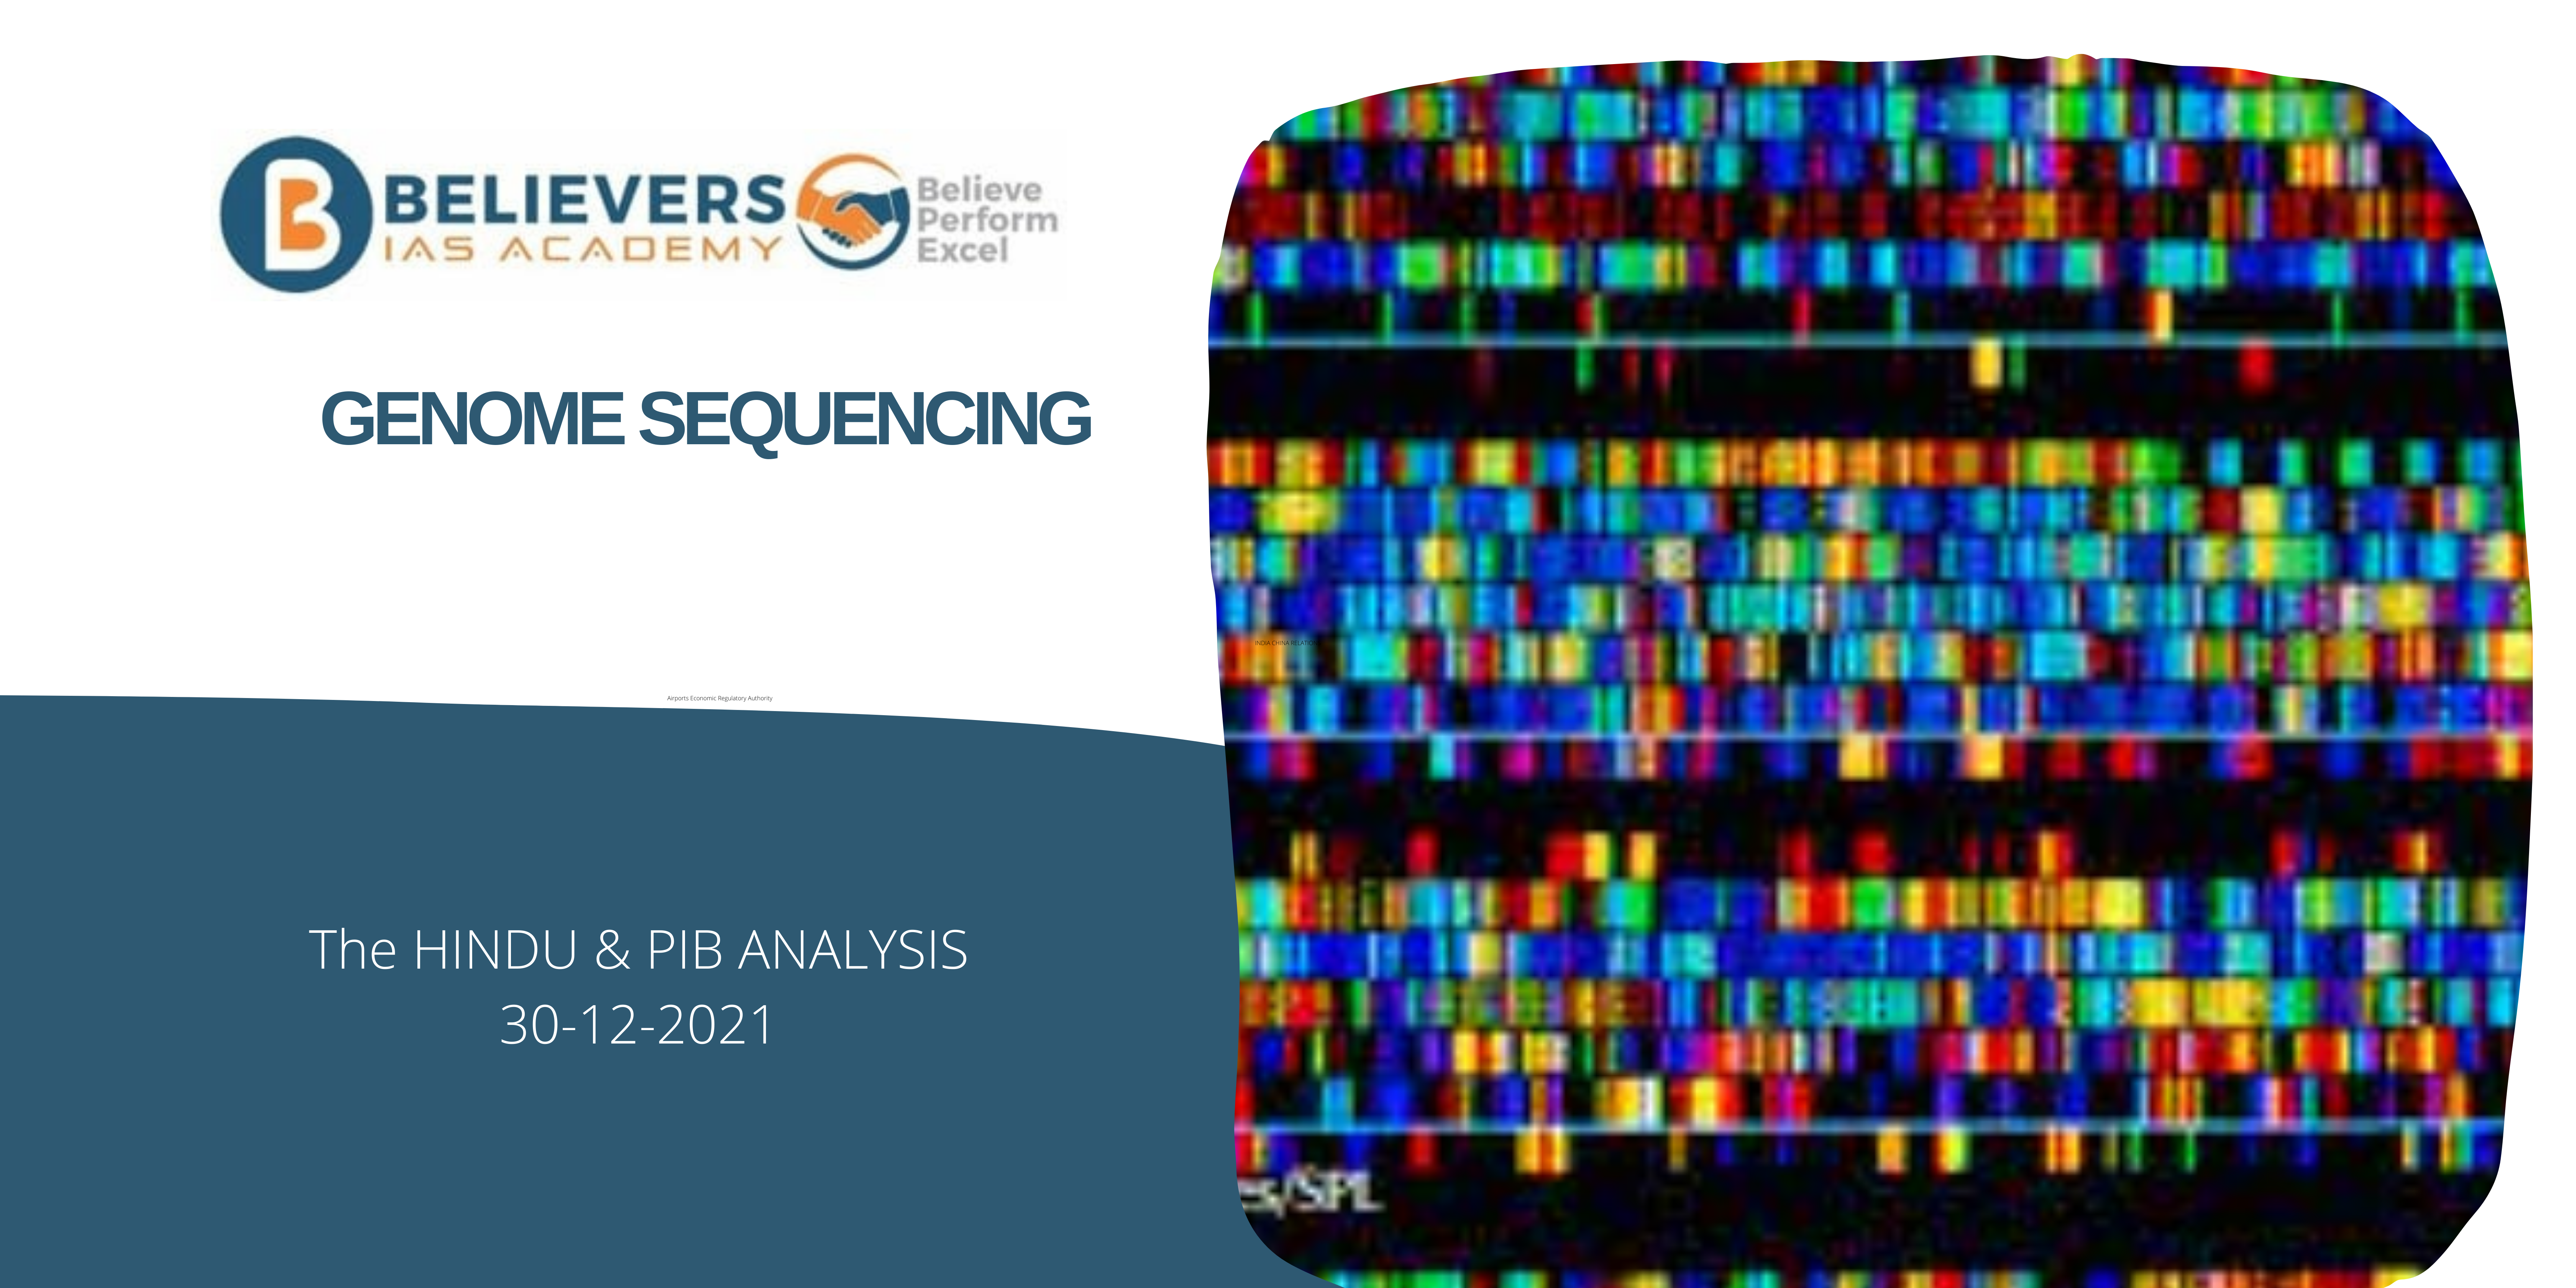 Civil services Current affairs - GENOME SEQUENCING